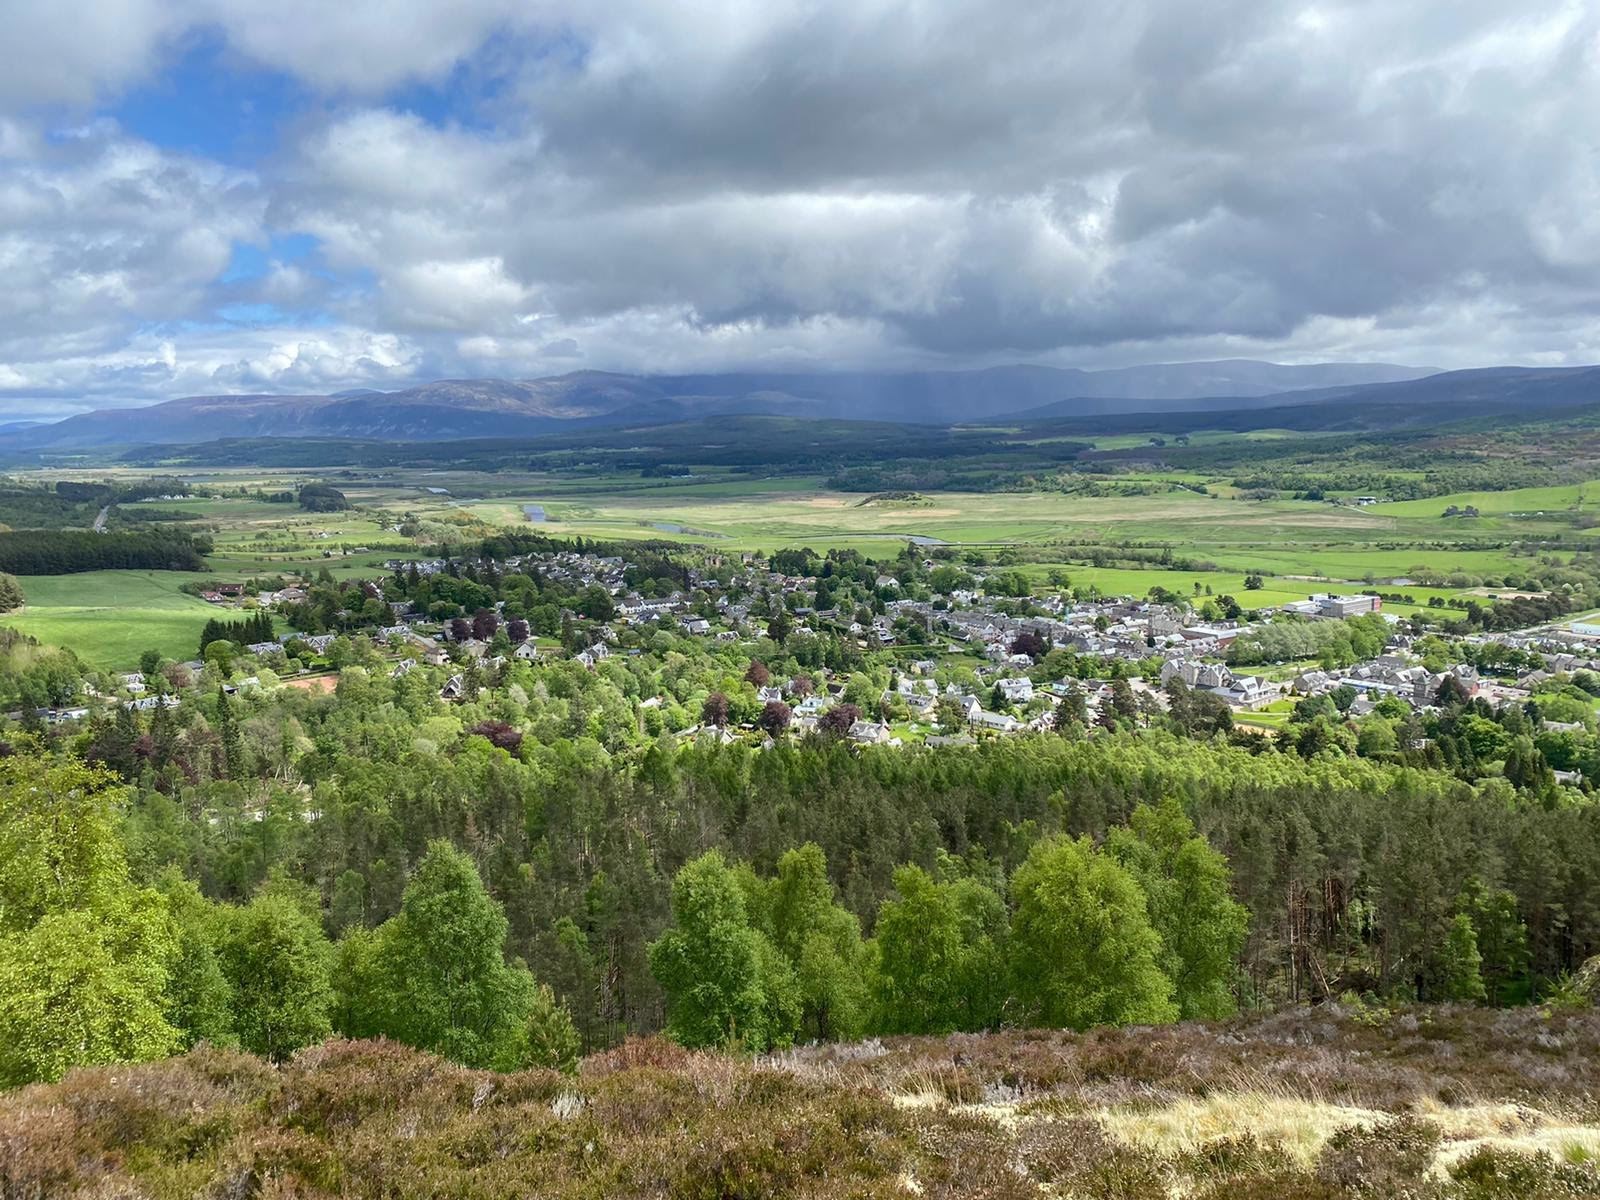 SPECTACULAR SITE: Pitmain Estate has chosen this majestic spot overlooking the Badenoch capital for its royal beacon